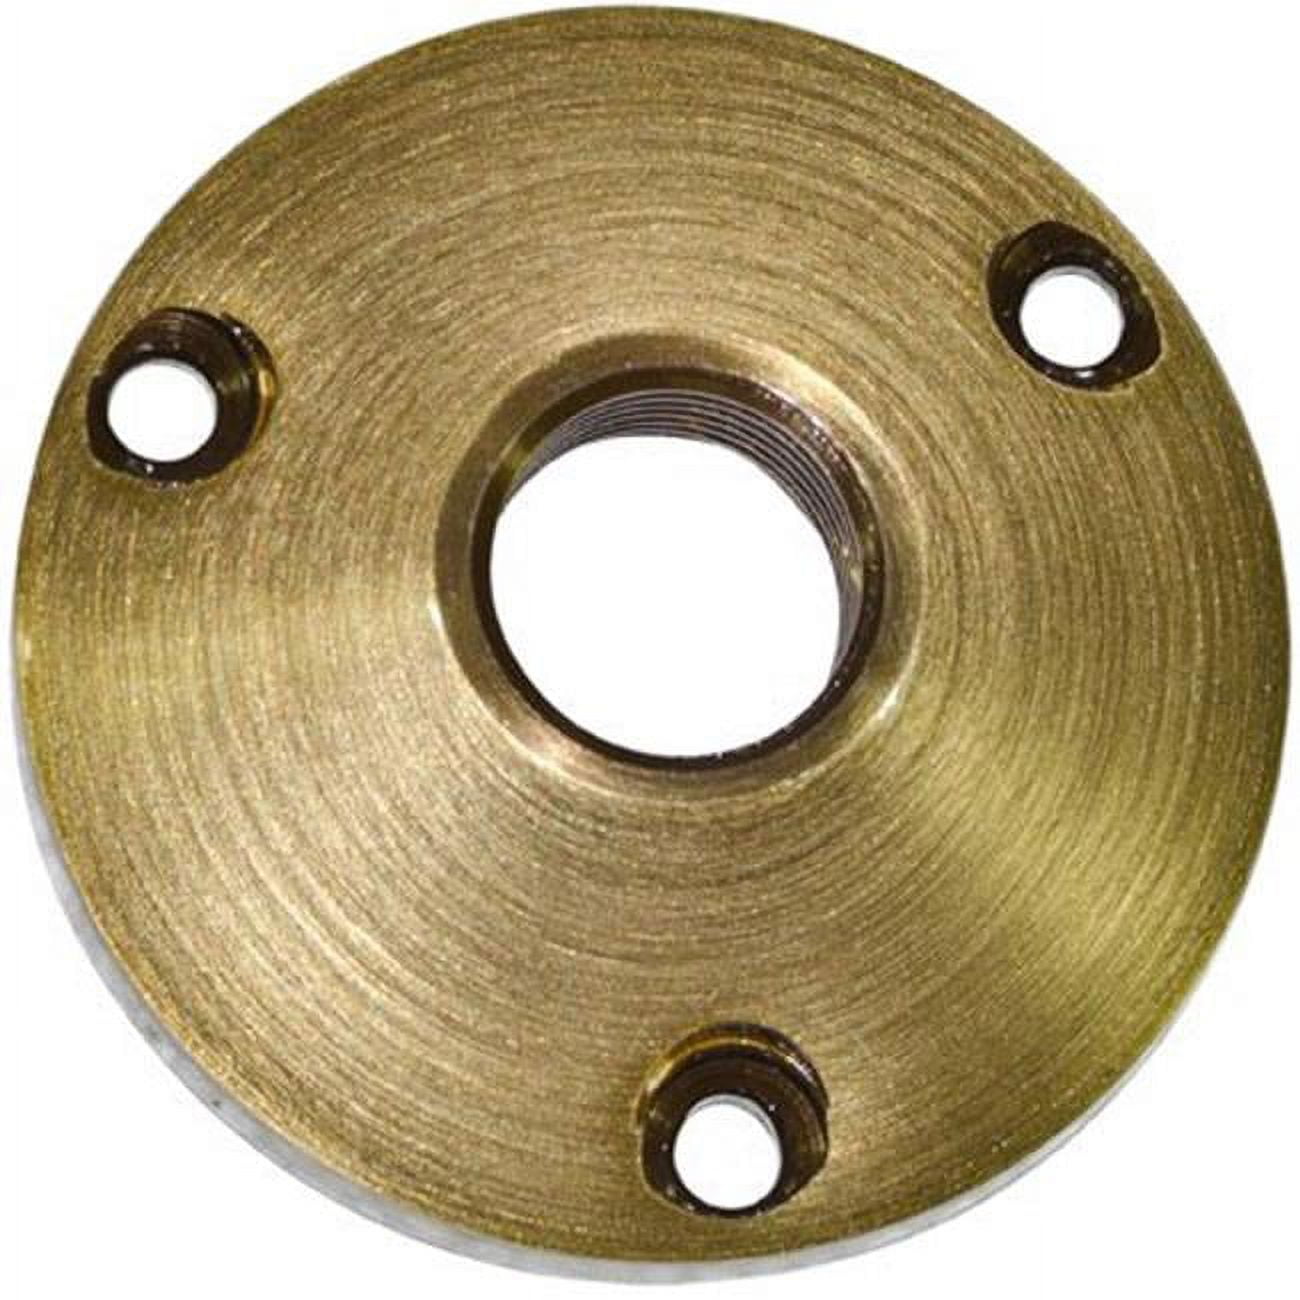 P-mb-5-abs Female Surface Mounting Bracket, Antique Brass - .85 X 2.75 X 2.75 In.